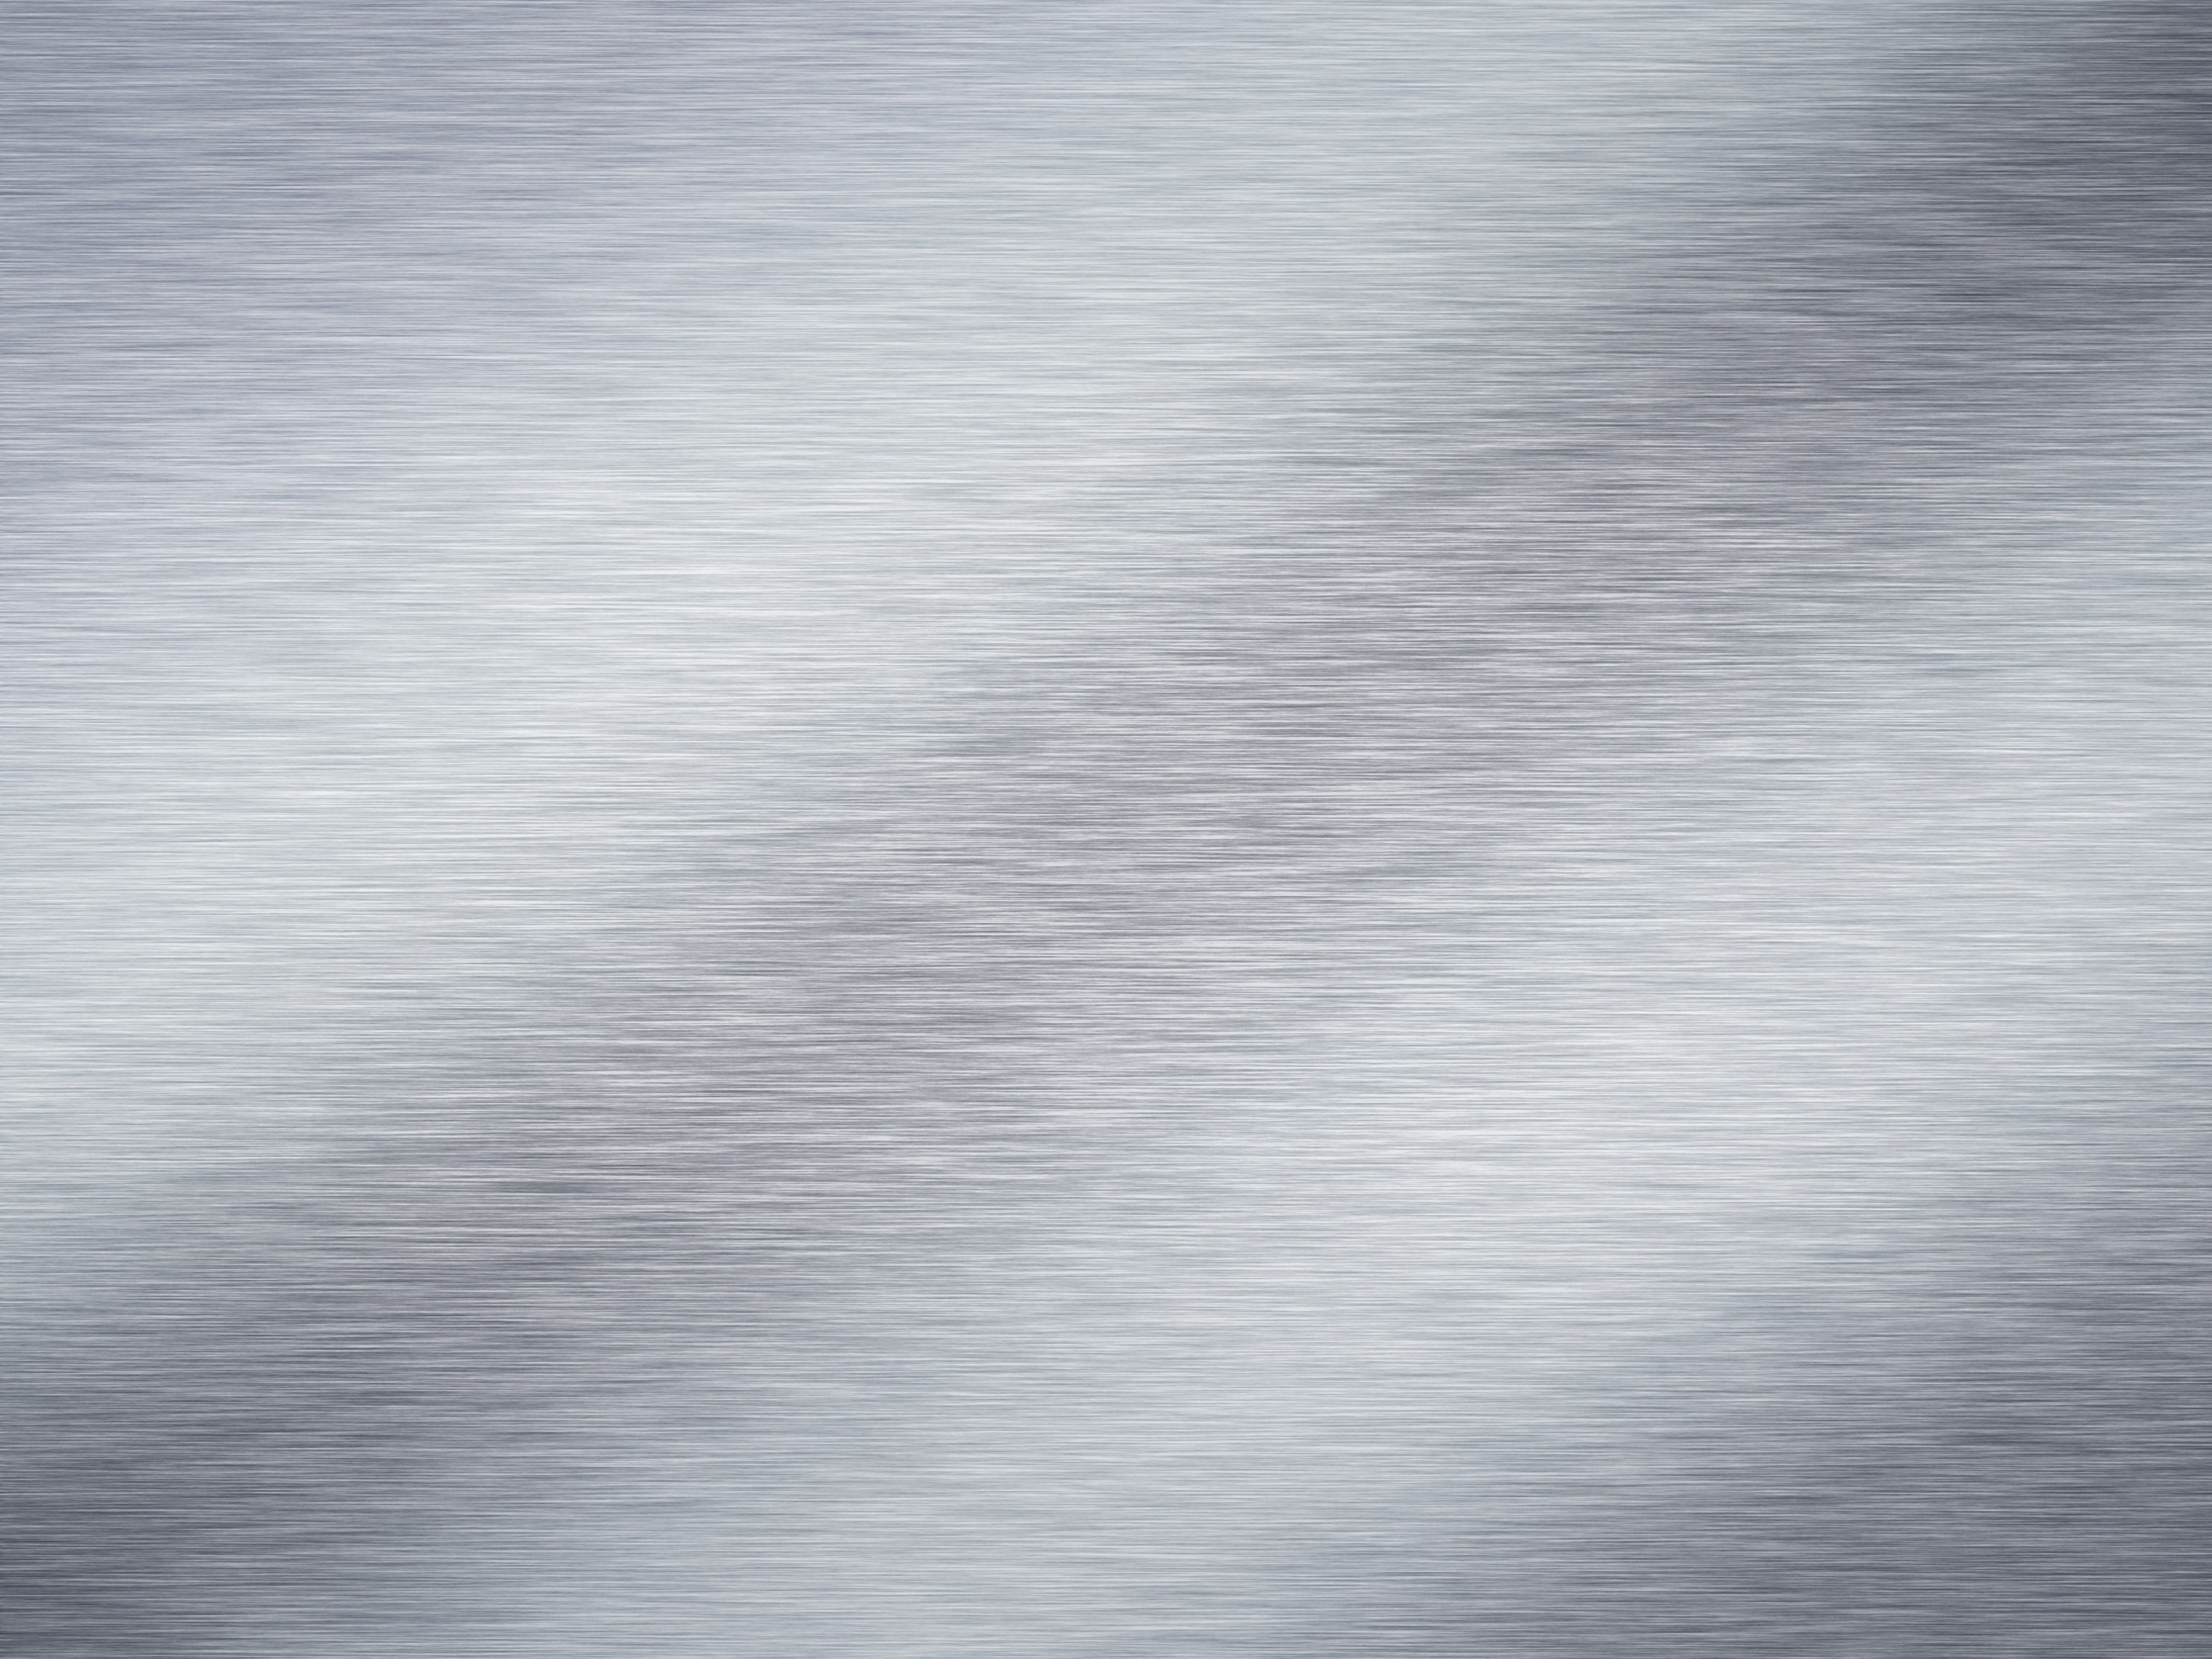 Brushed Steel Background Texture Metal Or